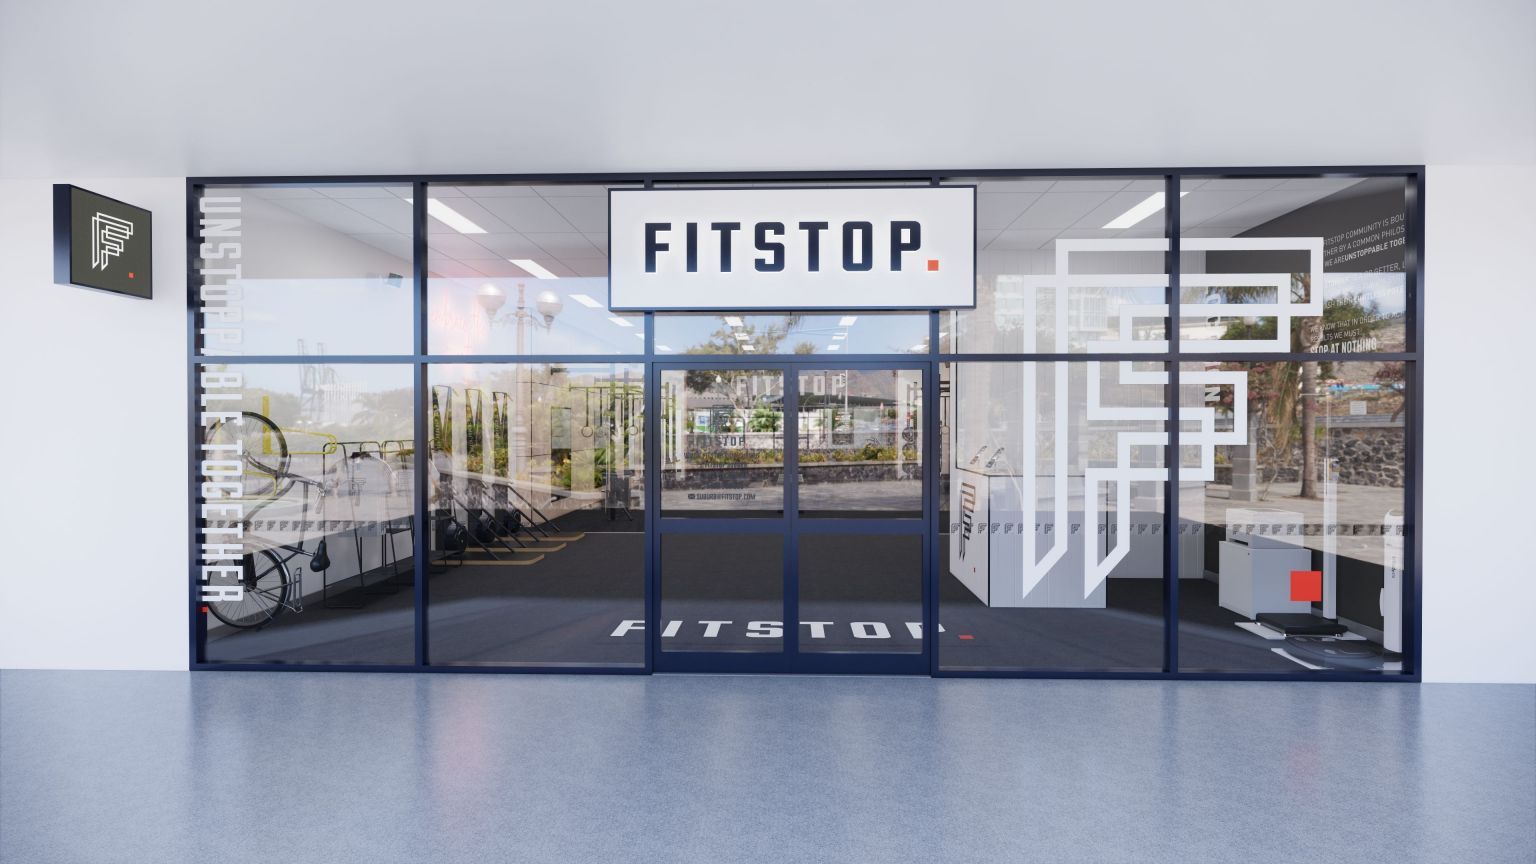 Fitstop recruits for six roles